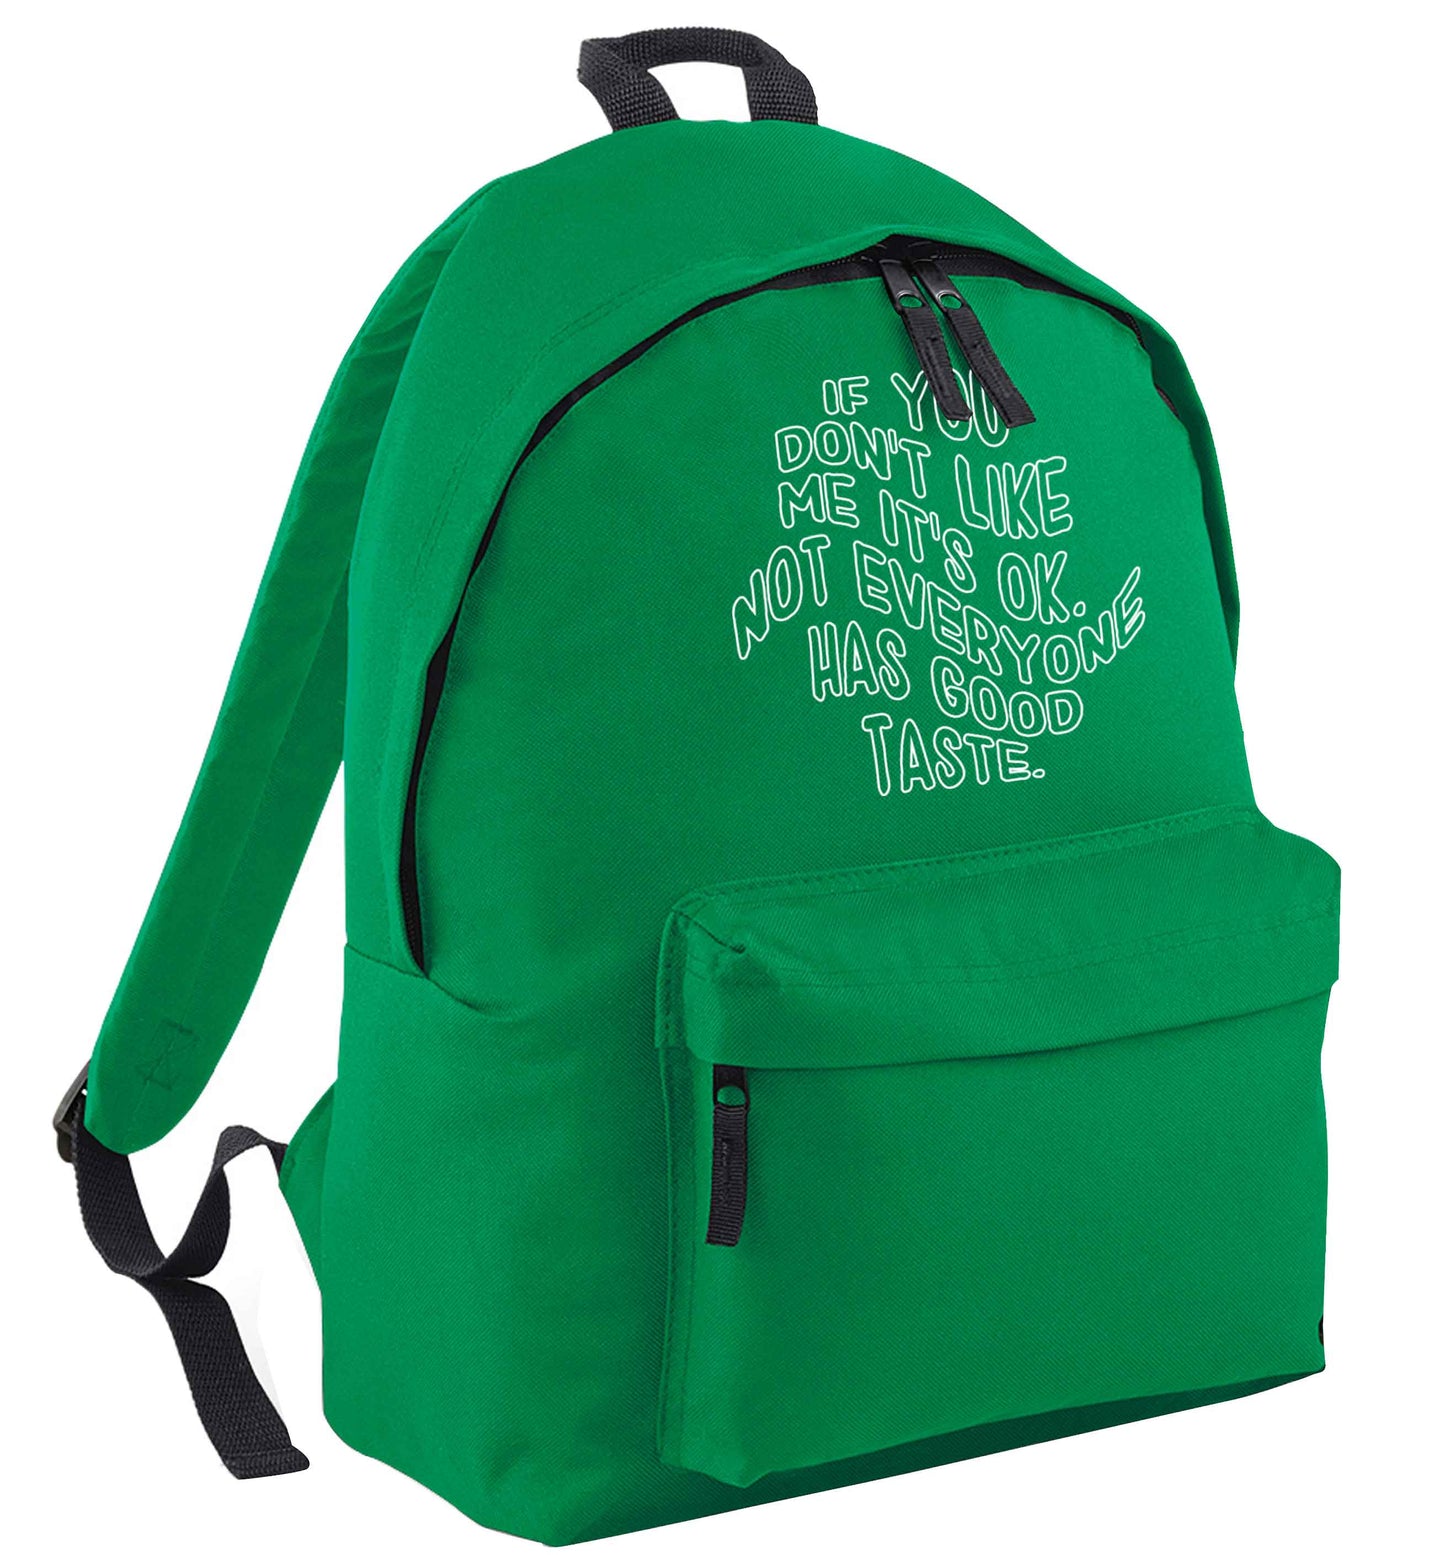 If you don't like me it's ok not everyone has good taste green adults backpack